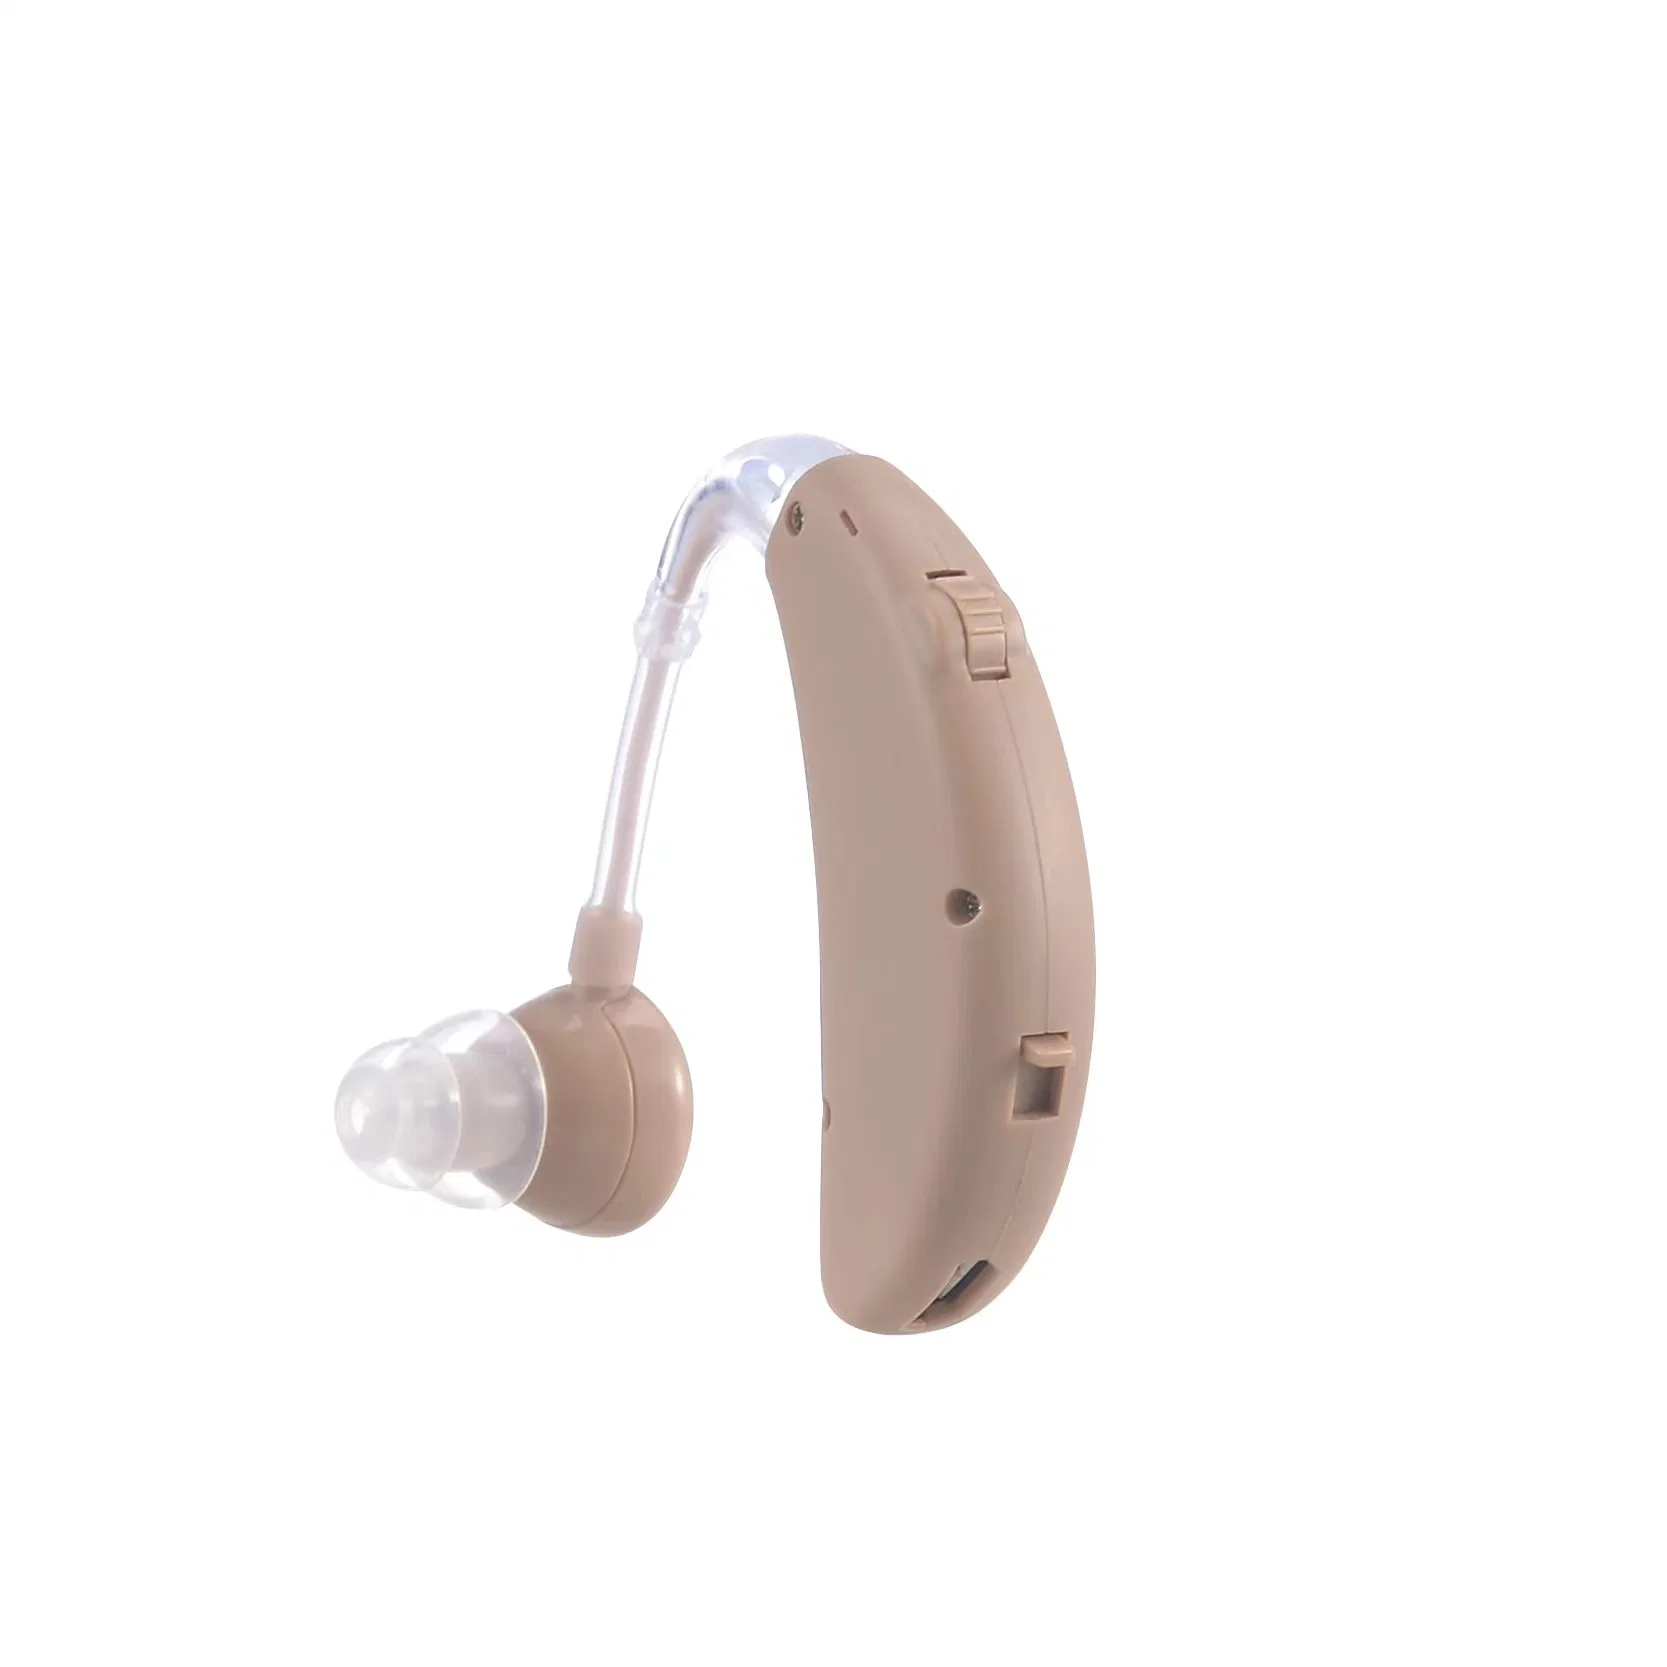 New Digital Brother Medical Standard Carton Programmable Hearing Deaf Aid